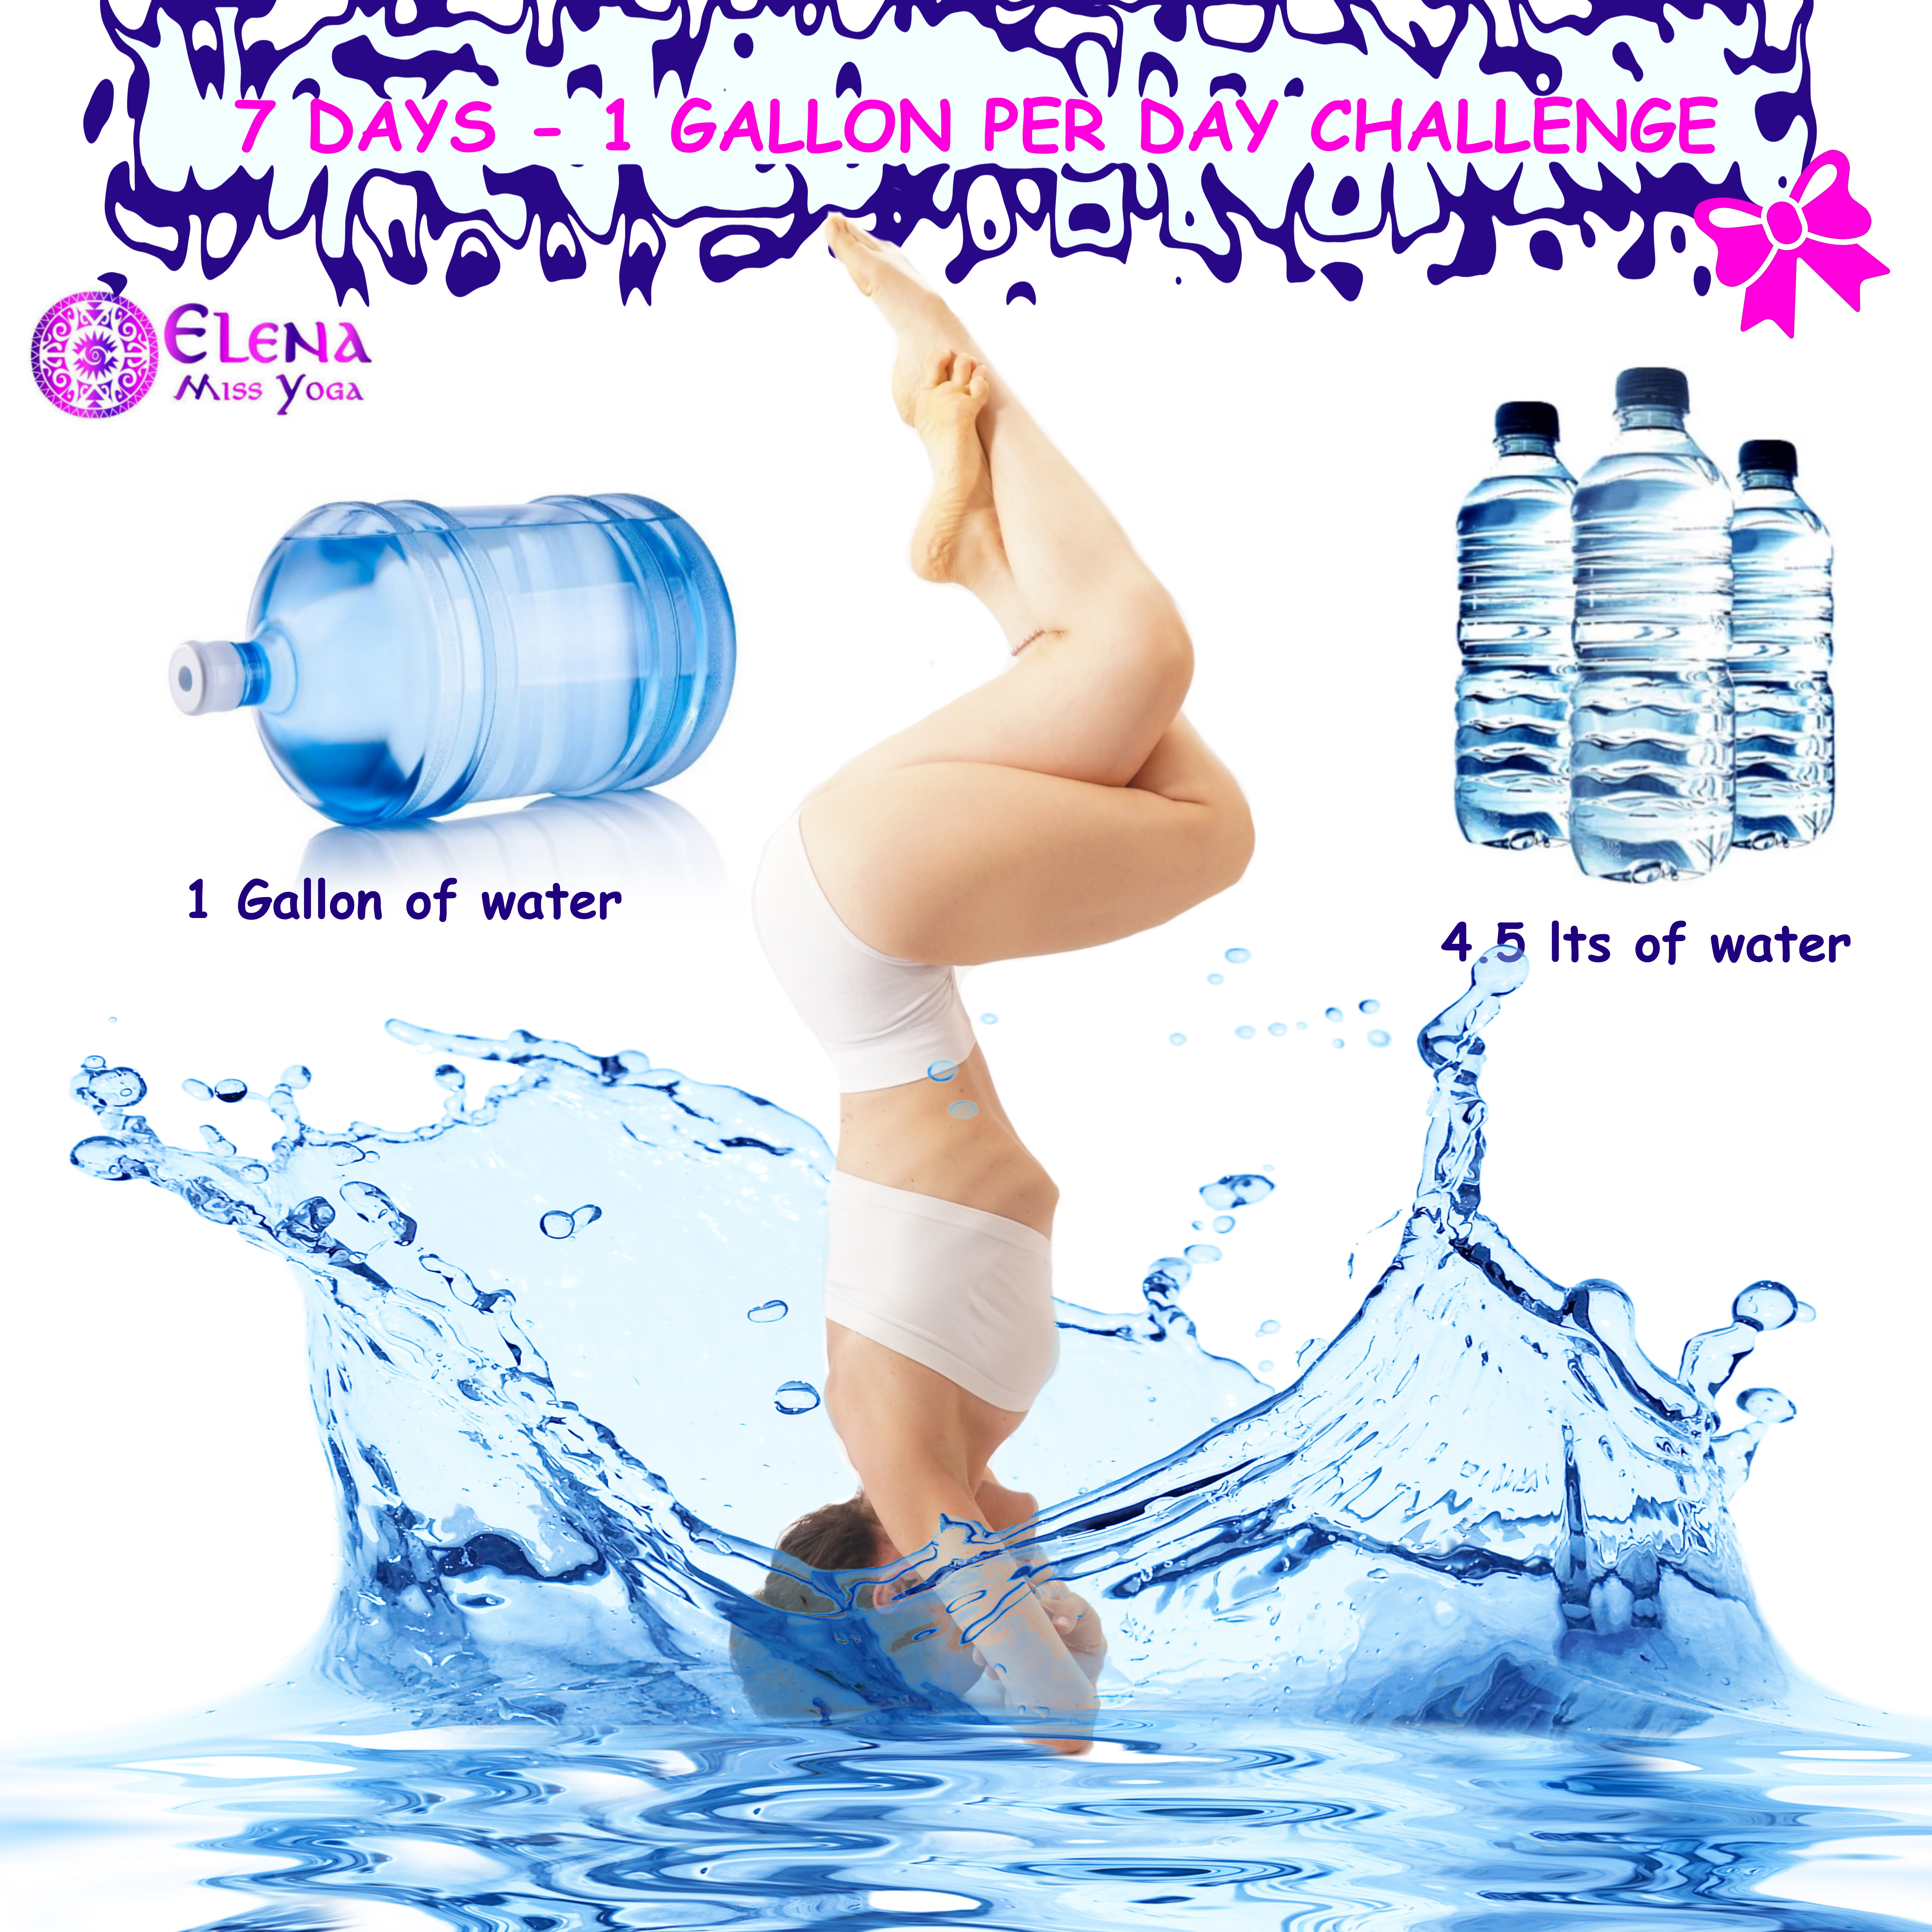 ONE GALLON OF WATER PER DAY BENEFITS